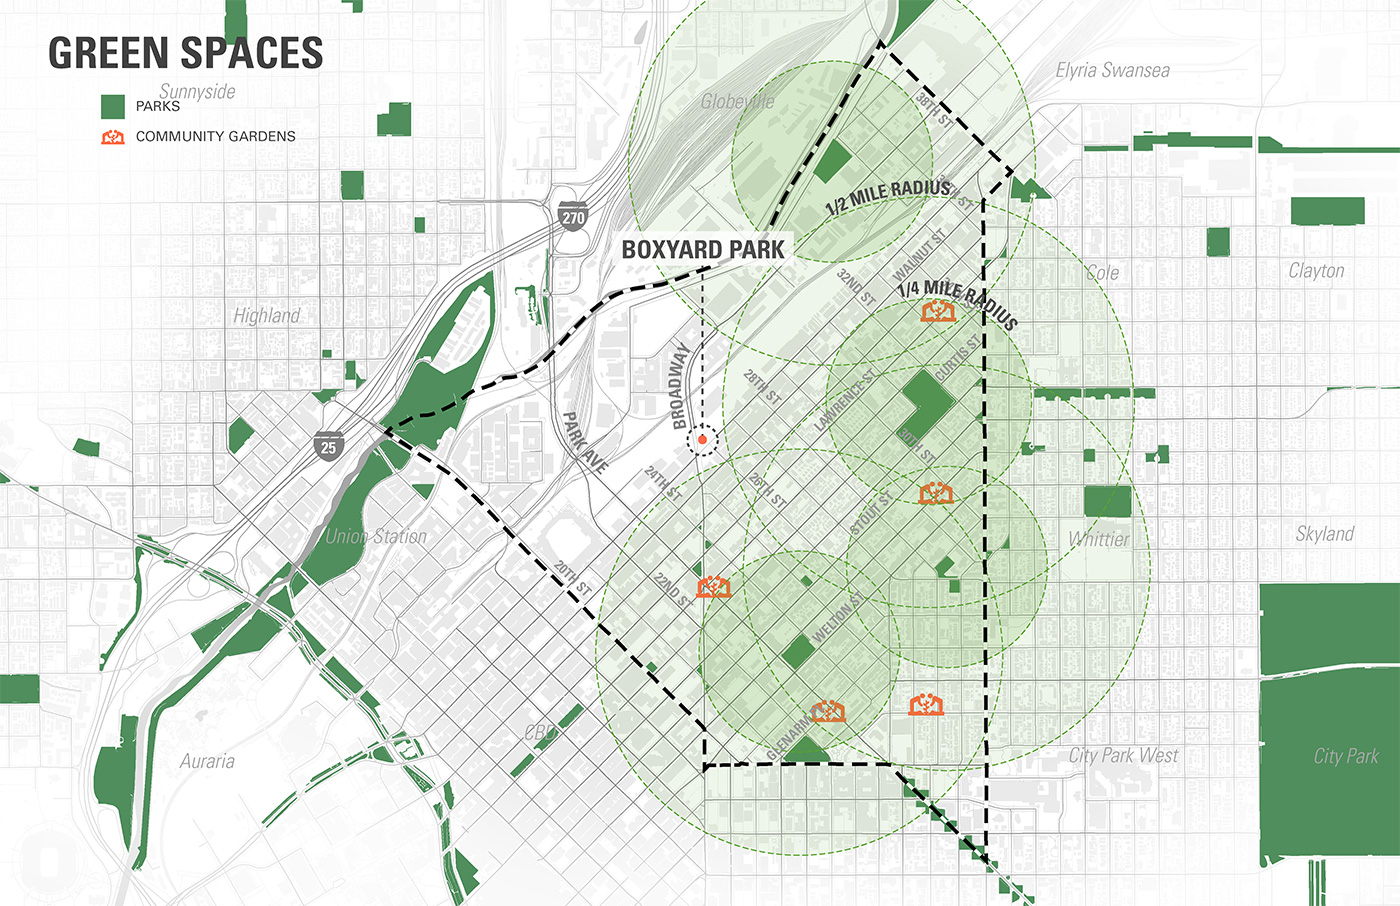 Diagram of existing green spaces